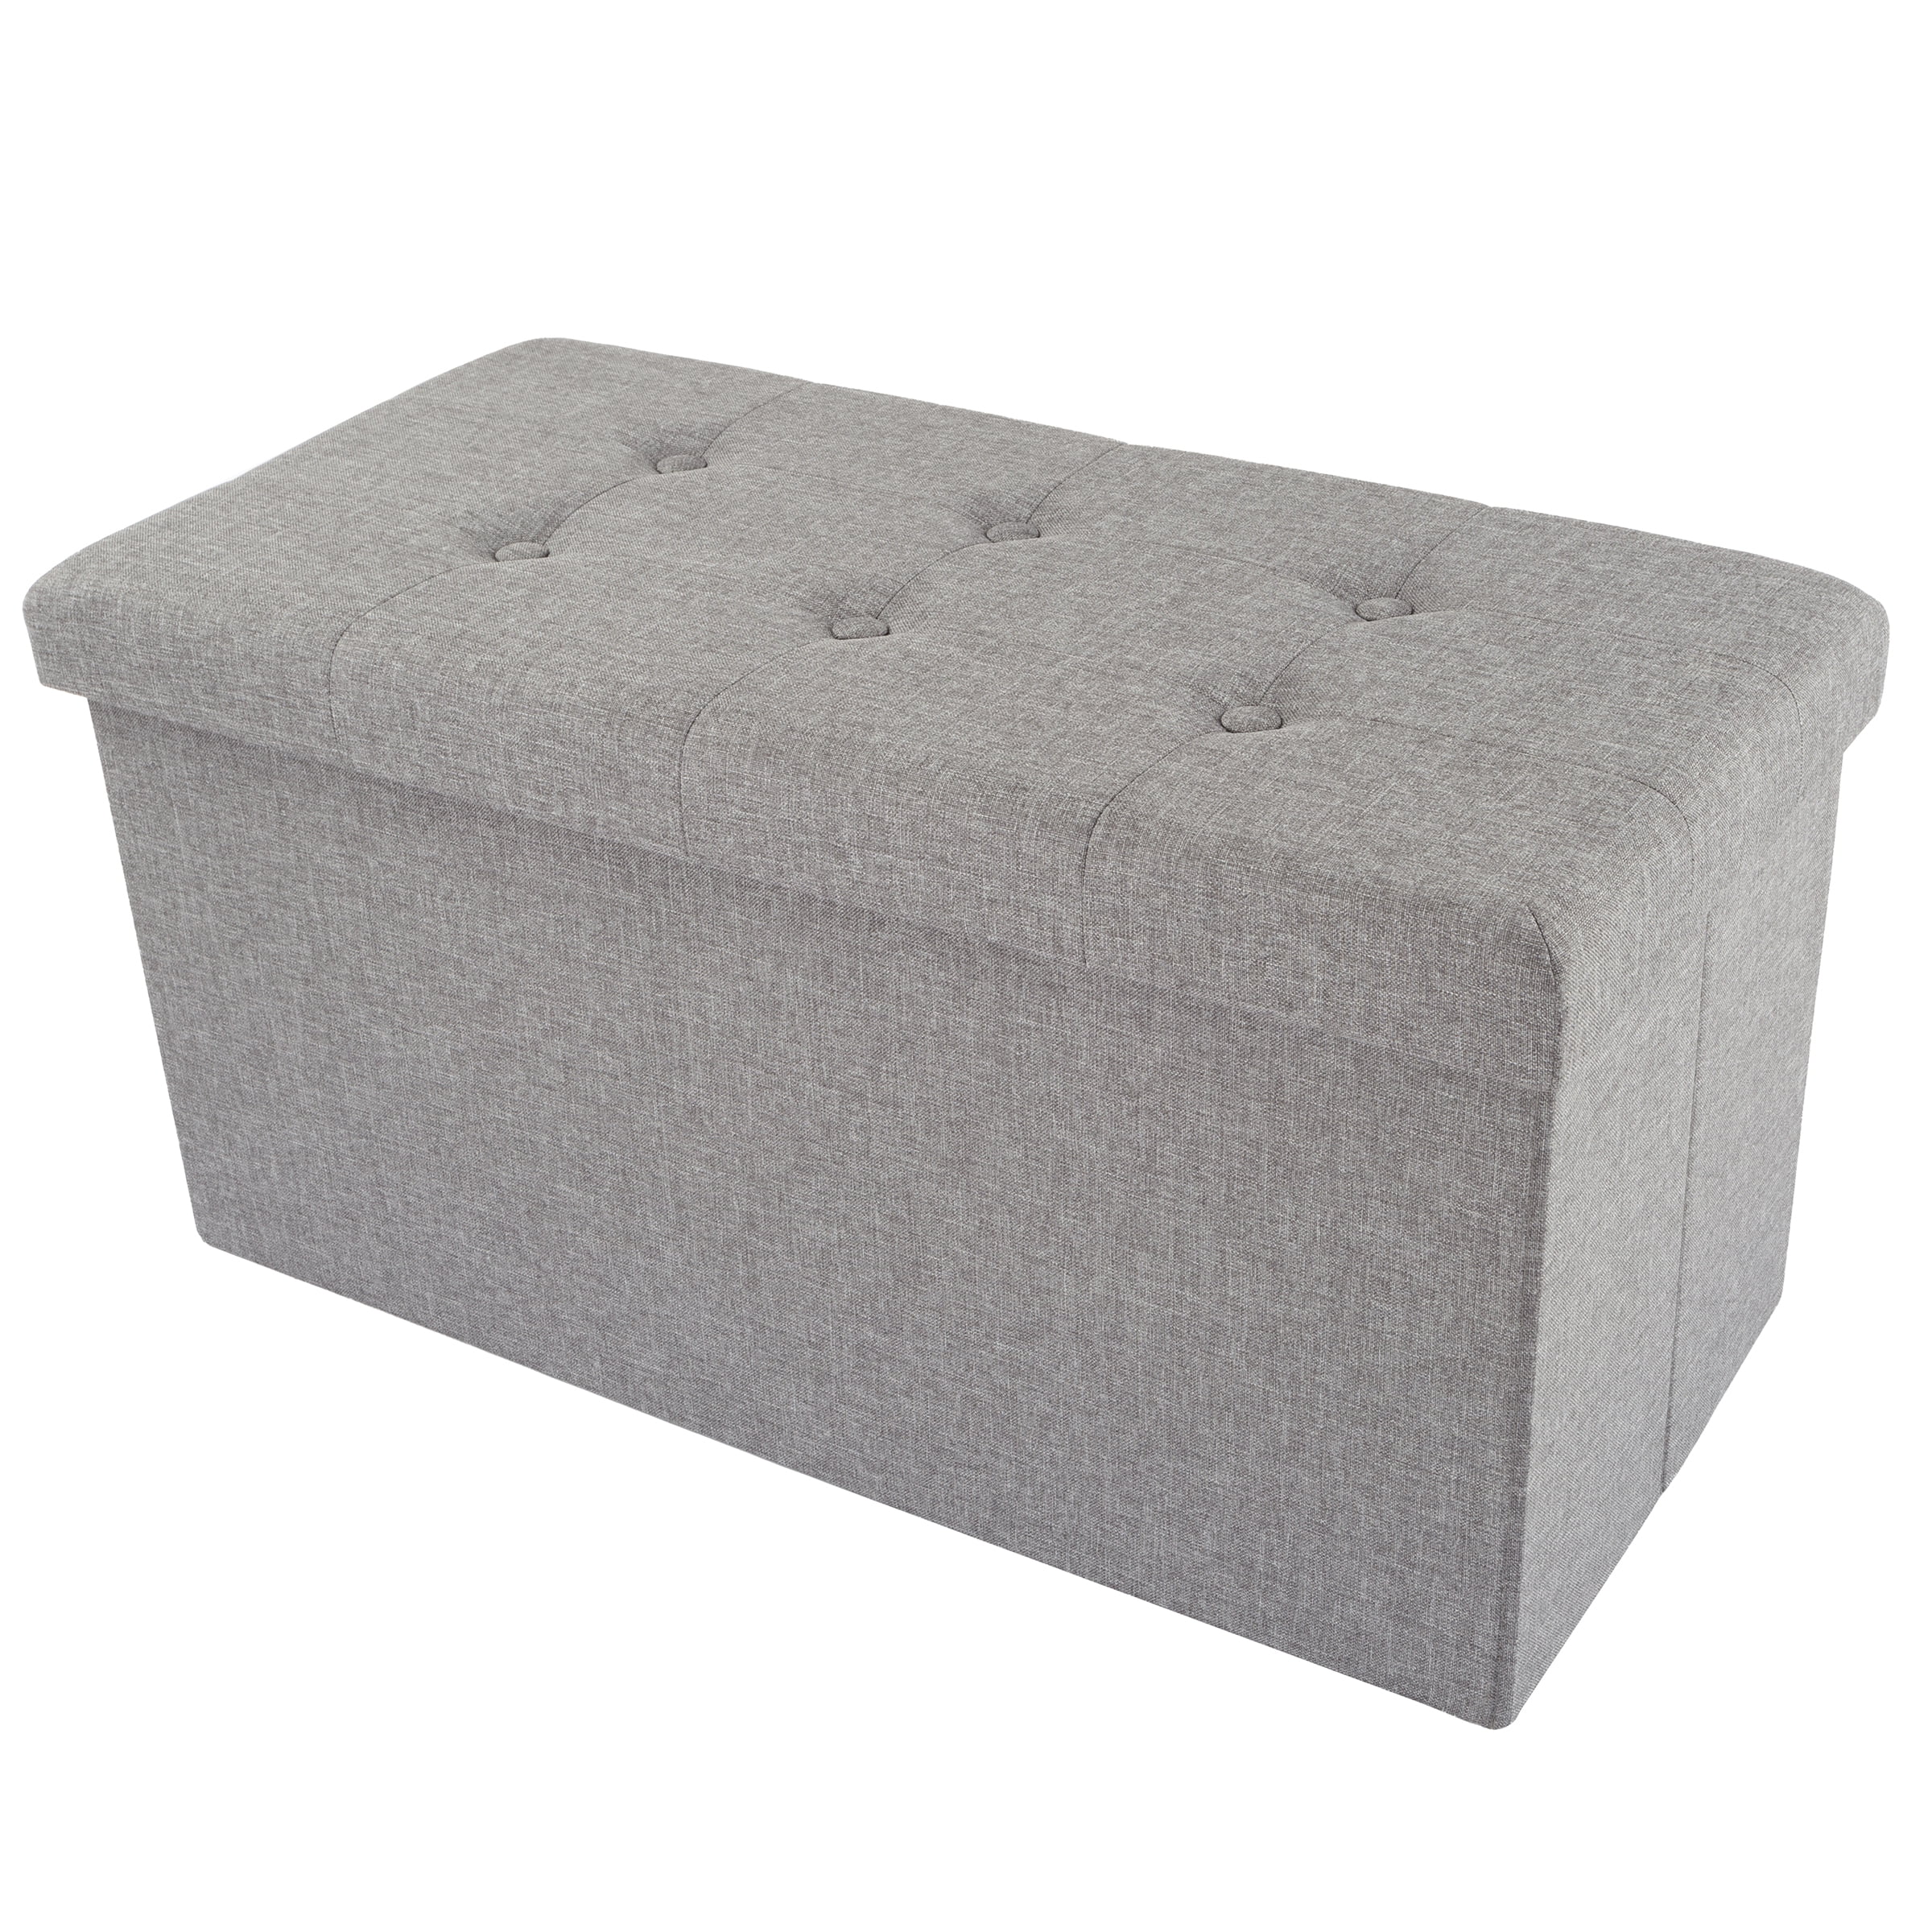 Crushed Velvet Fordable Ottoman Storage Box Large 2 Seater Double Foot Stool New 